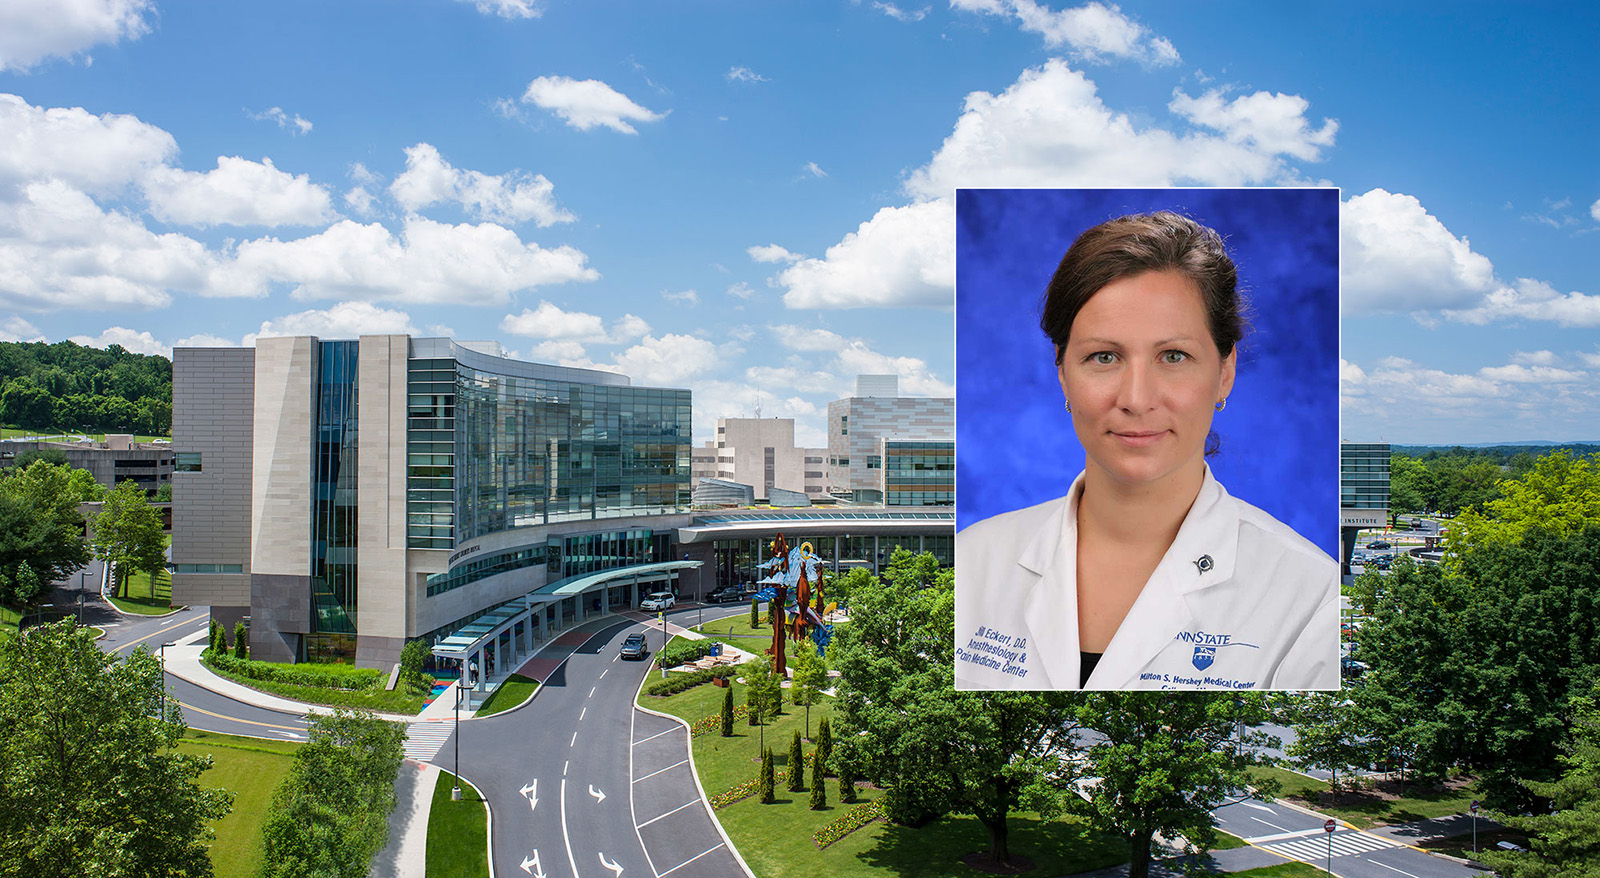 A head-and-shoulders professional portrait of Jill Eckert, DO, with Milton S. Hershey Medical Center in the background